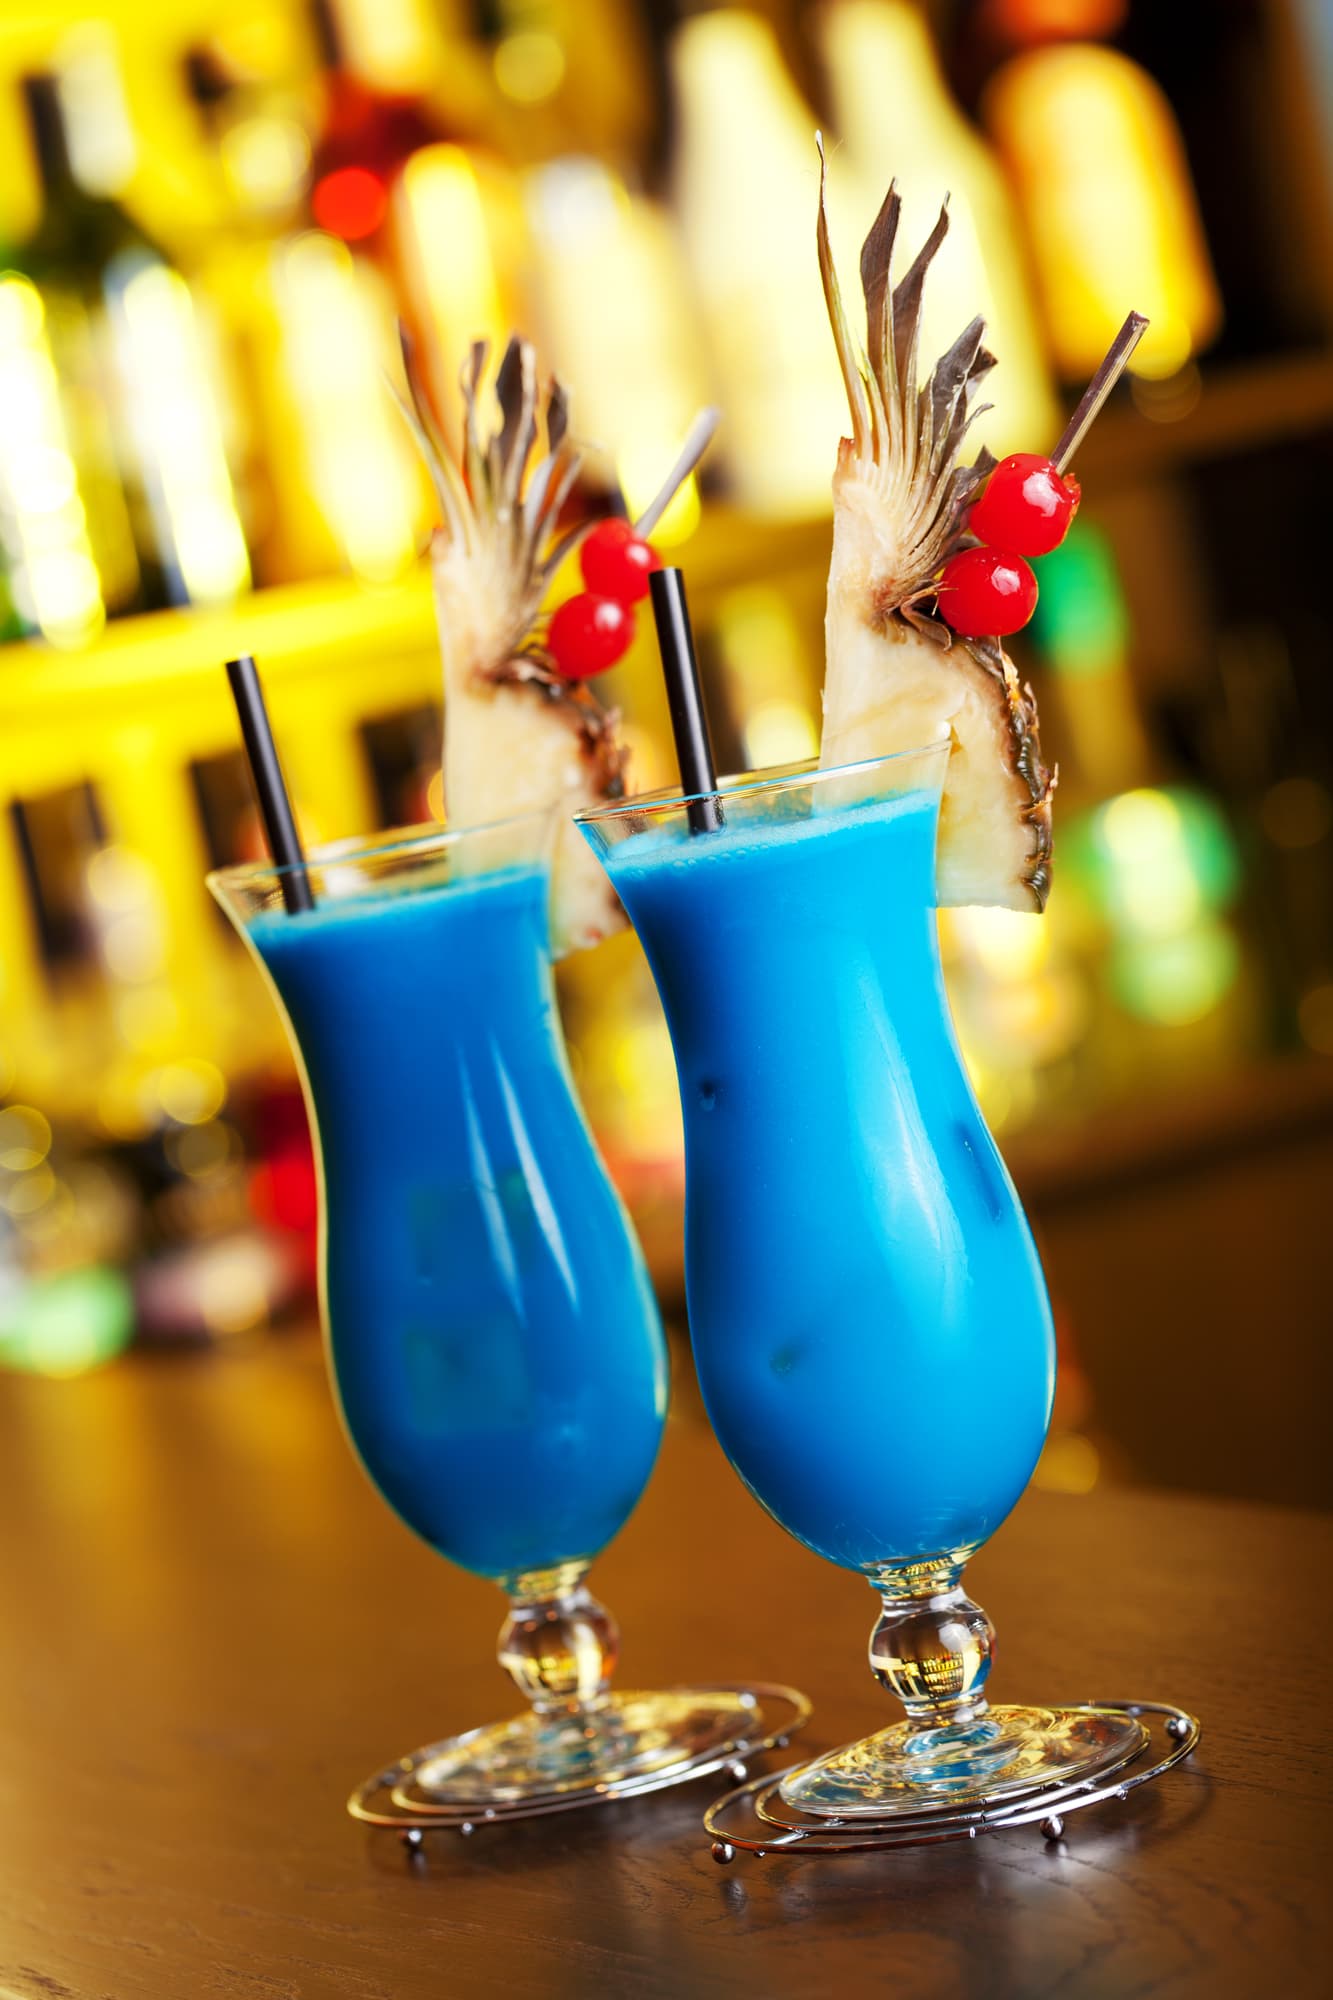 Creamy blue cocktail in two tall glasses, served with a small slice of pineapple and cherries.